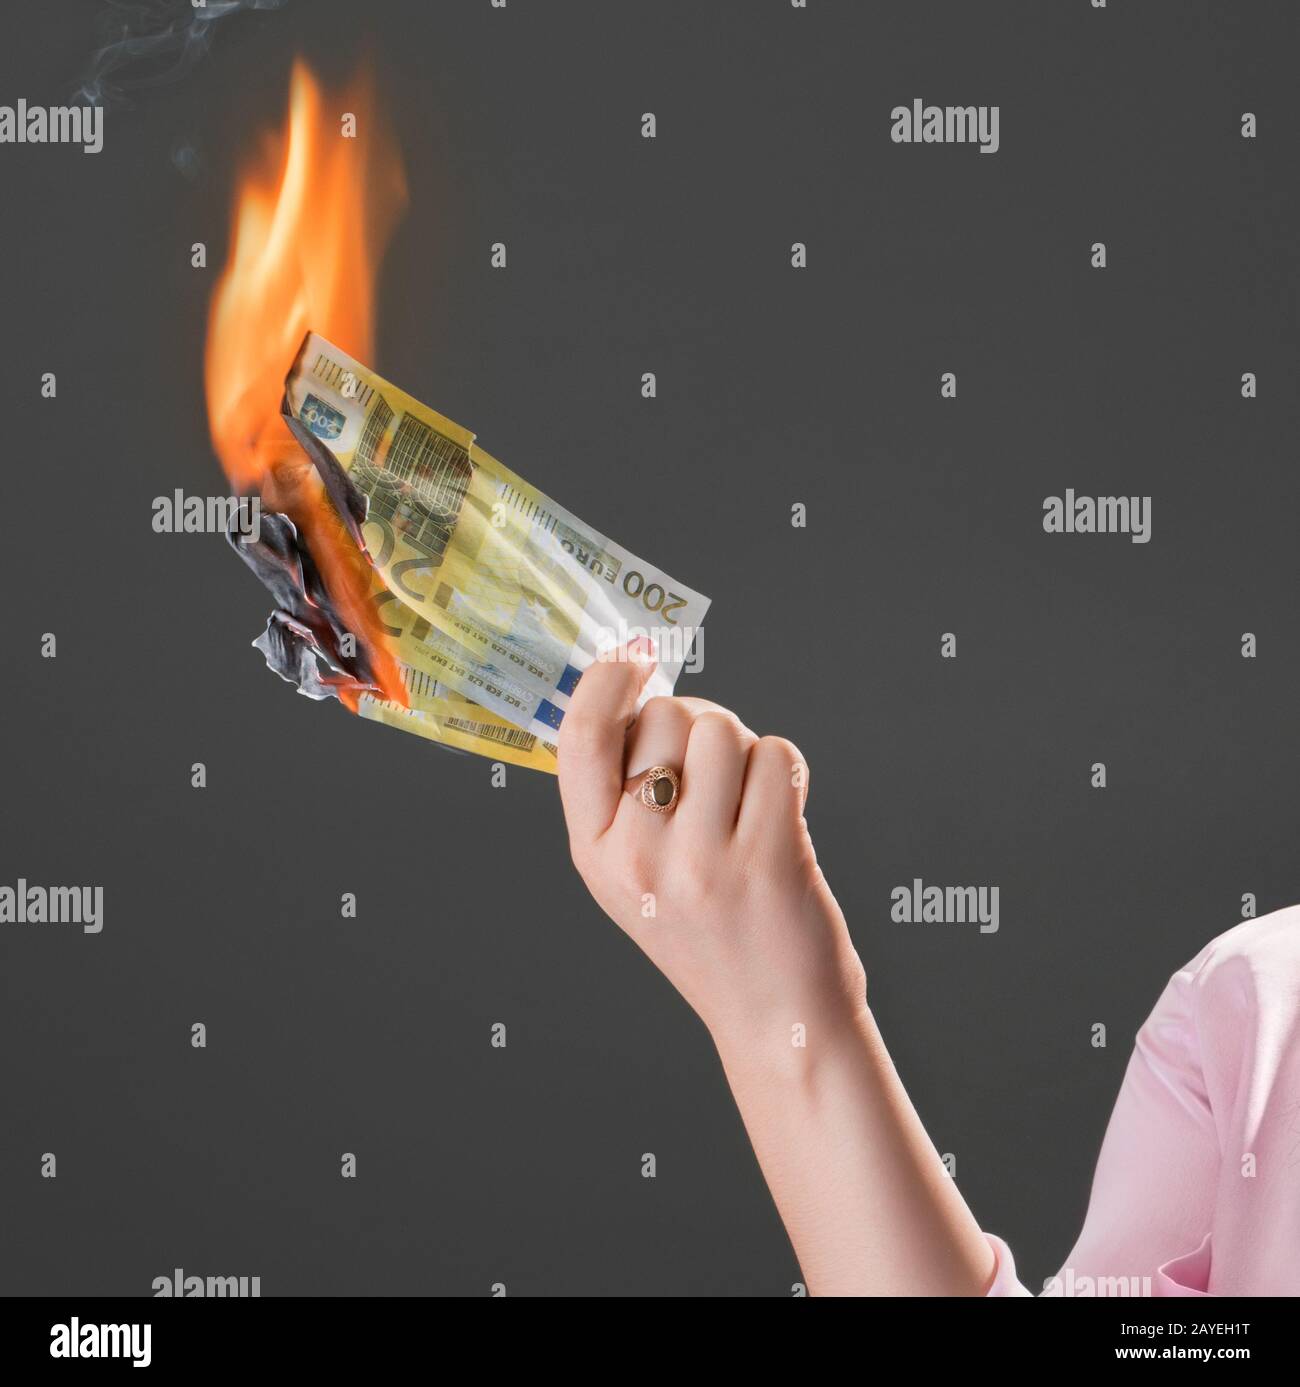 Smiling girl burns money. Concept of extravagance Stock Photo